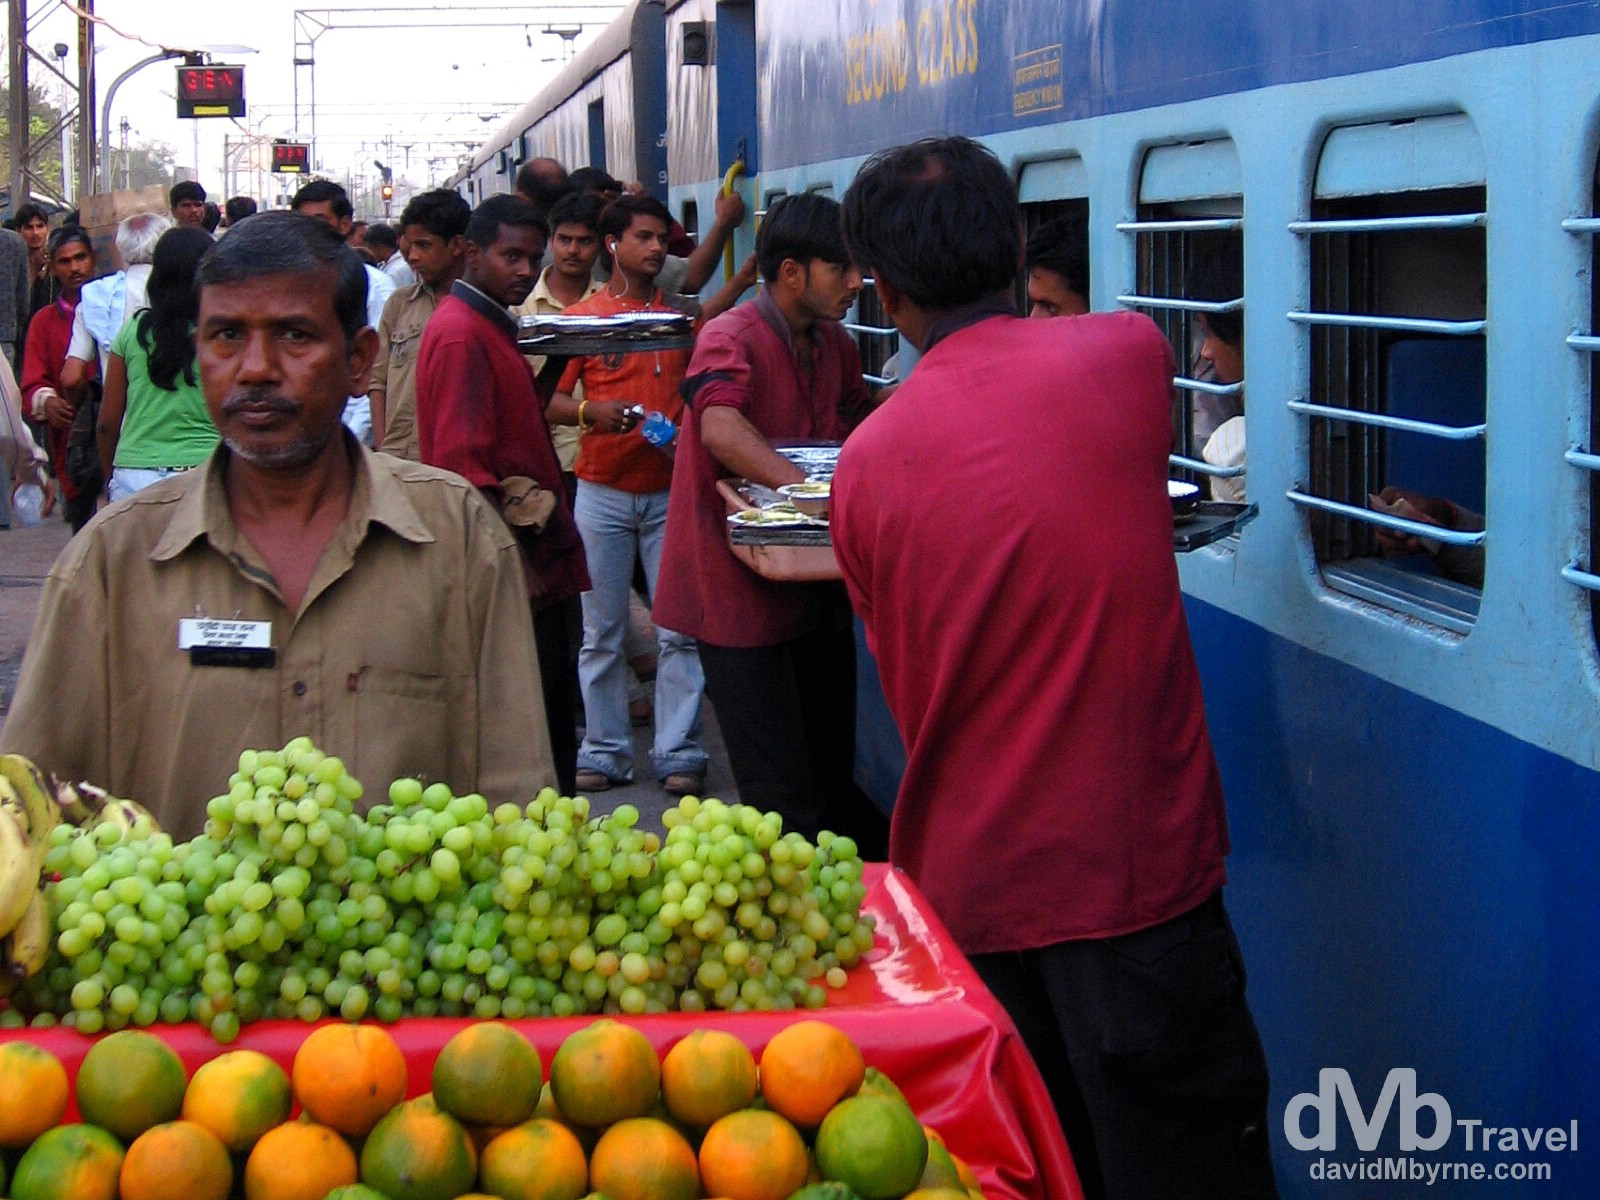 Vendors tending to the passengers on the Goa Express from the platform of Agra train station, India. March 26, 2008. 